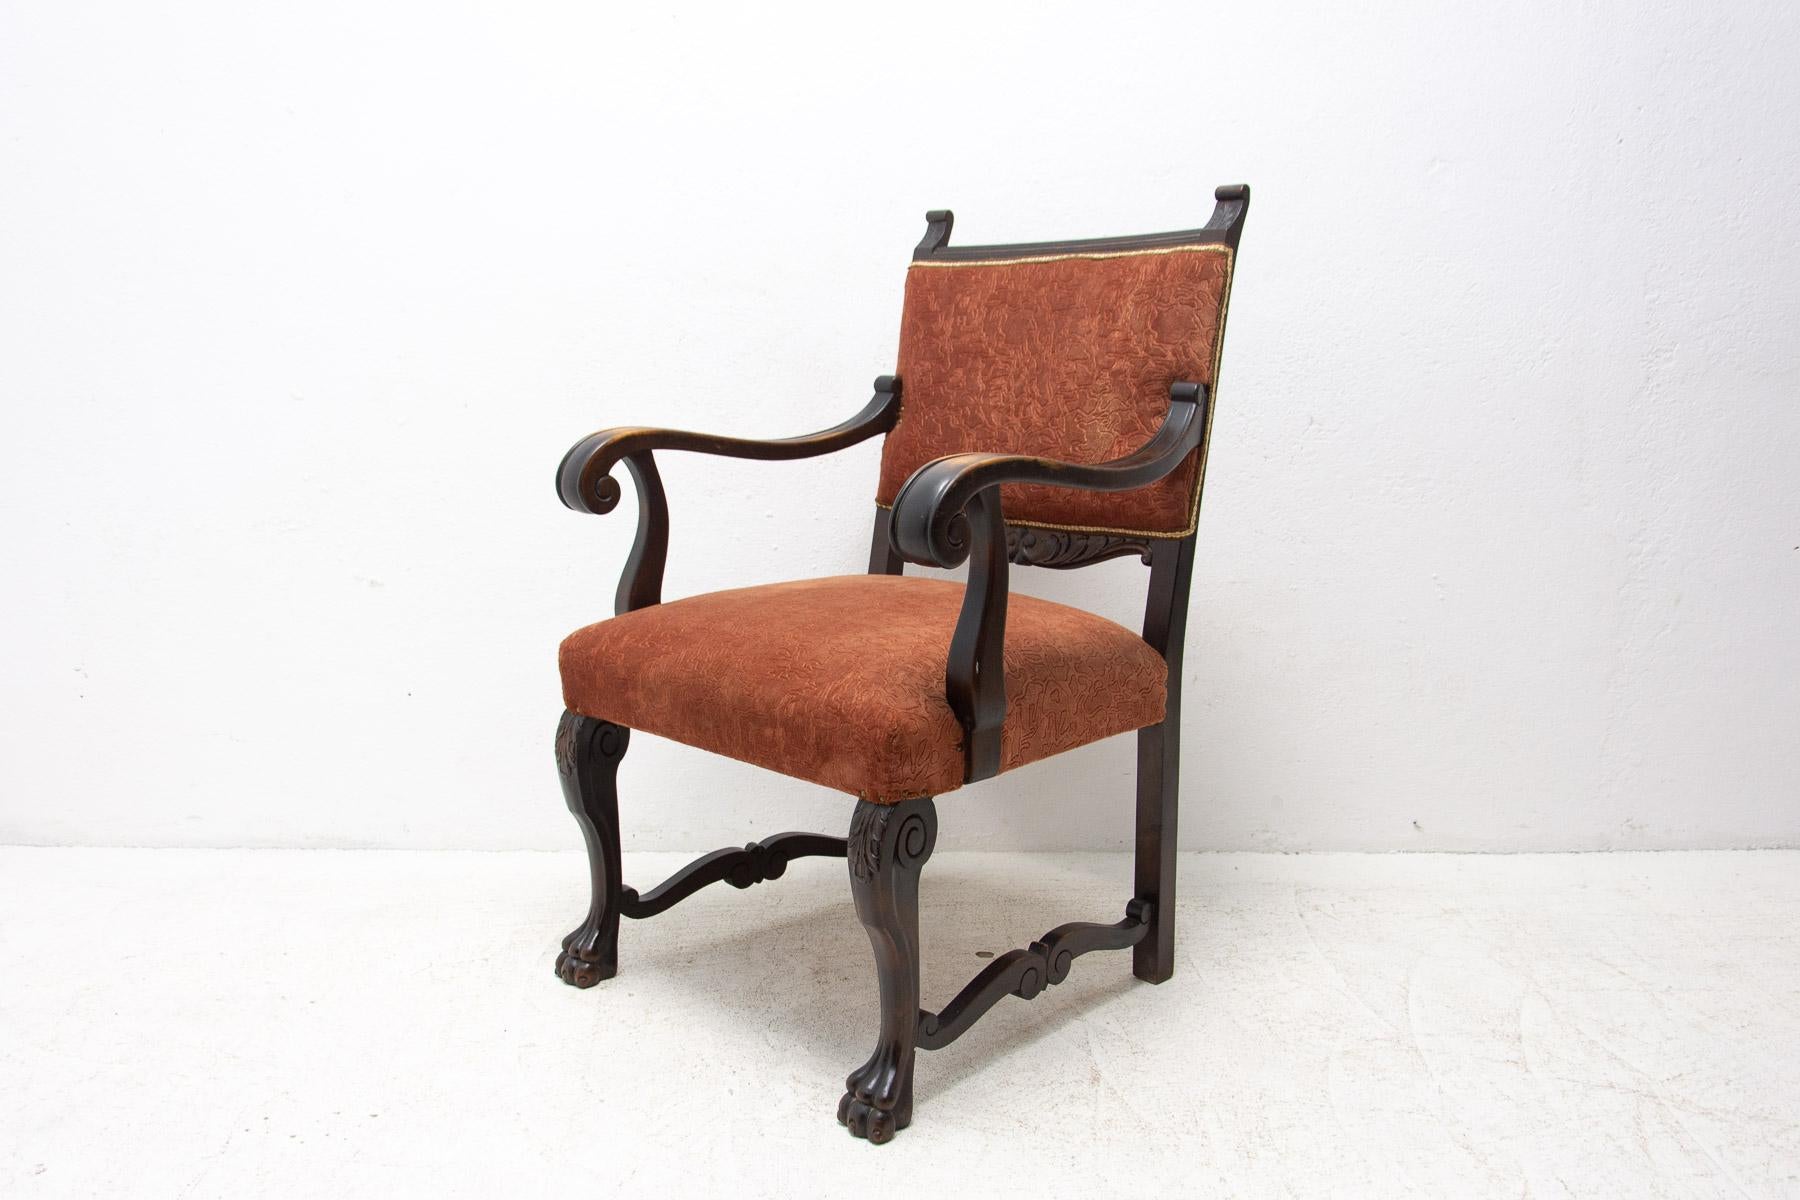 It was made of oak wood by a skilled carver in the second half of the 19th century. Quality wide and comfortable armchair made in the spirit of aristocratic romanticism. It is decorated with elegantly shaped and wide-spread armrests with a cut leaf